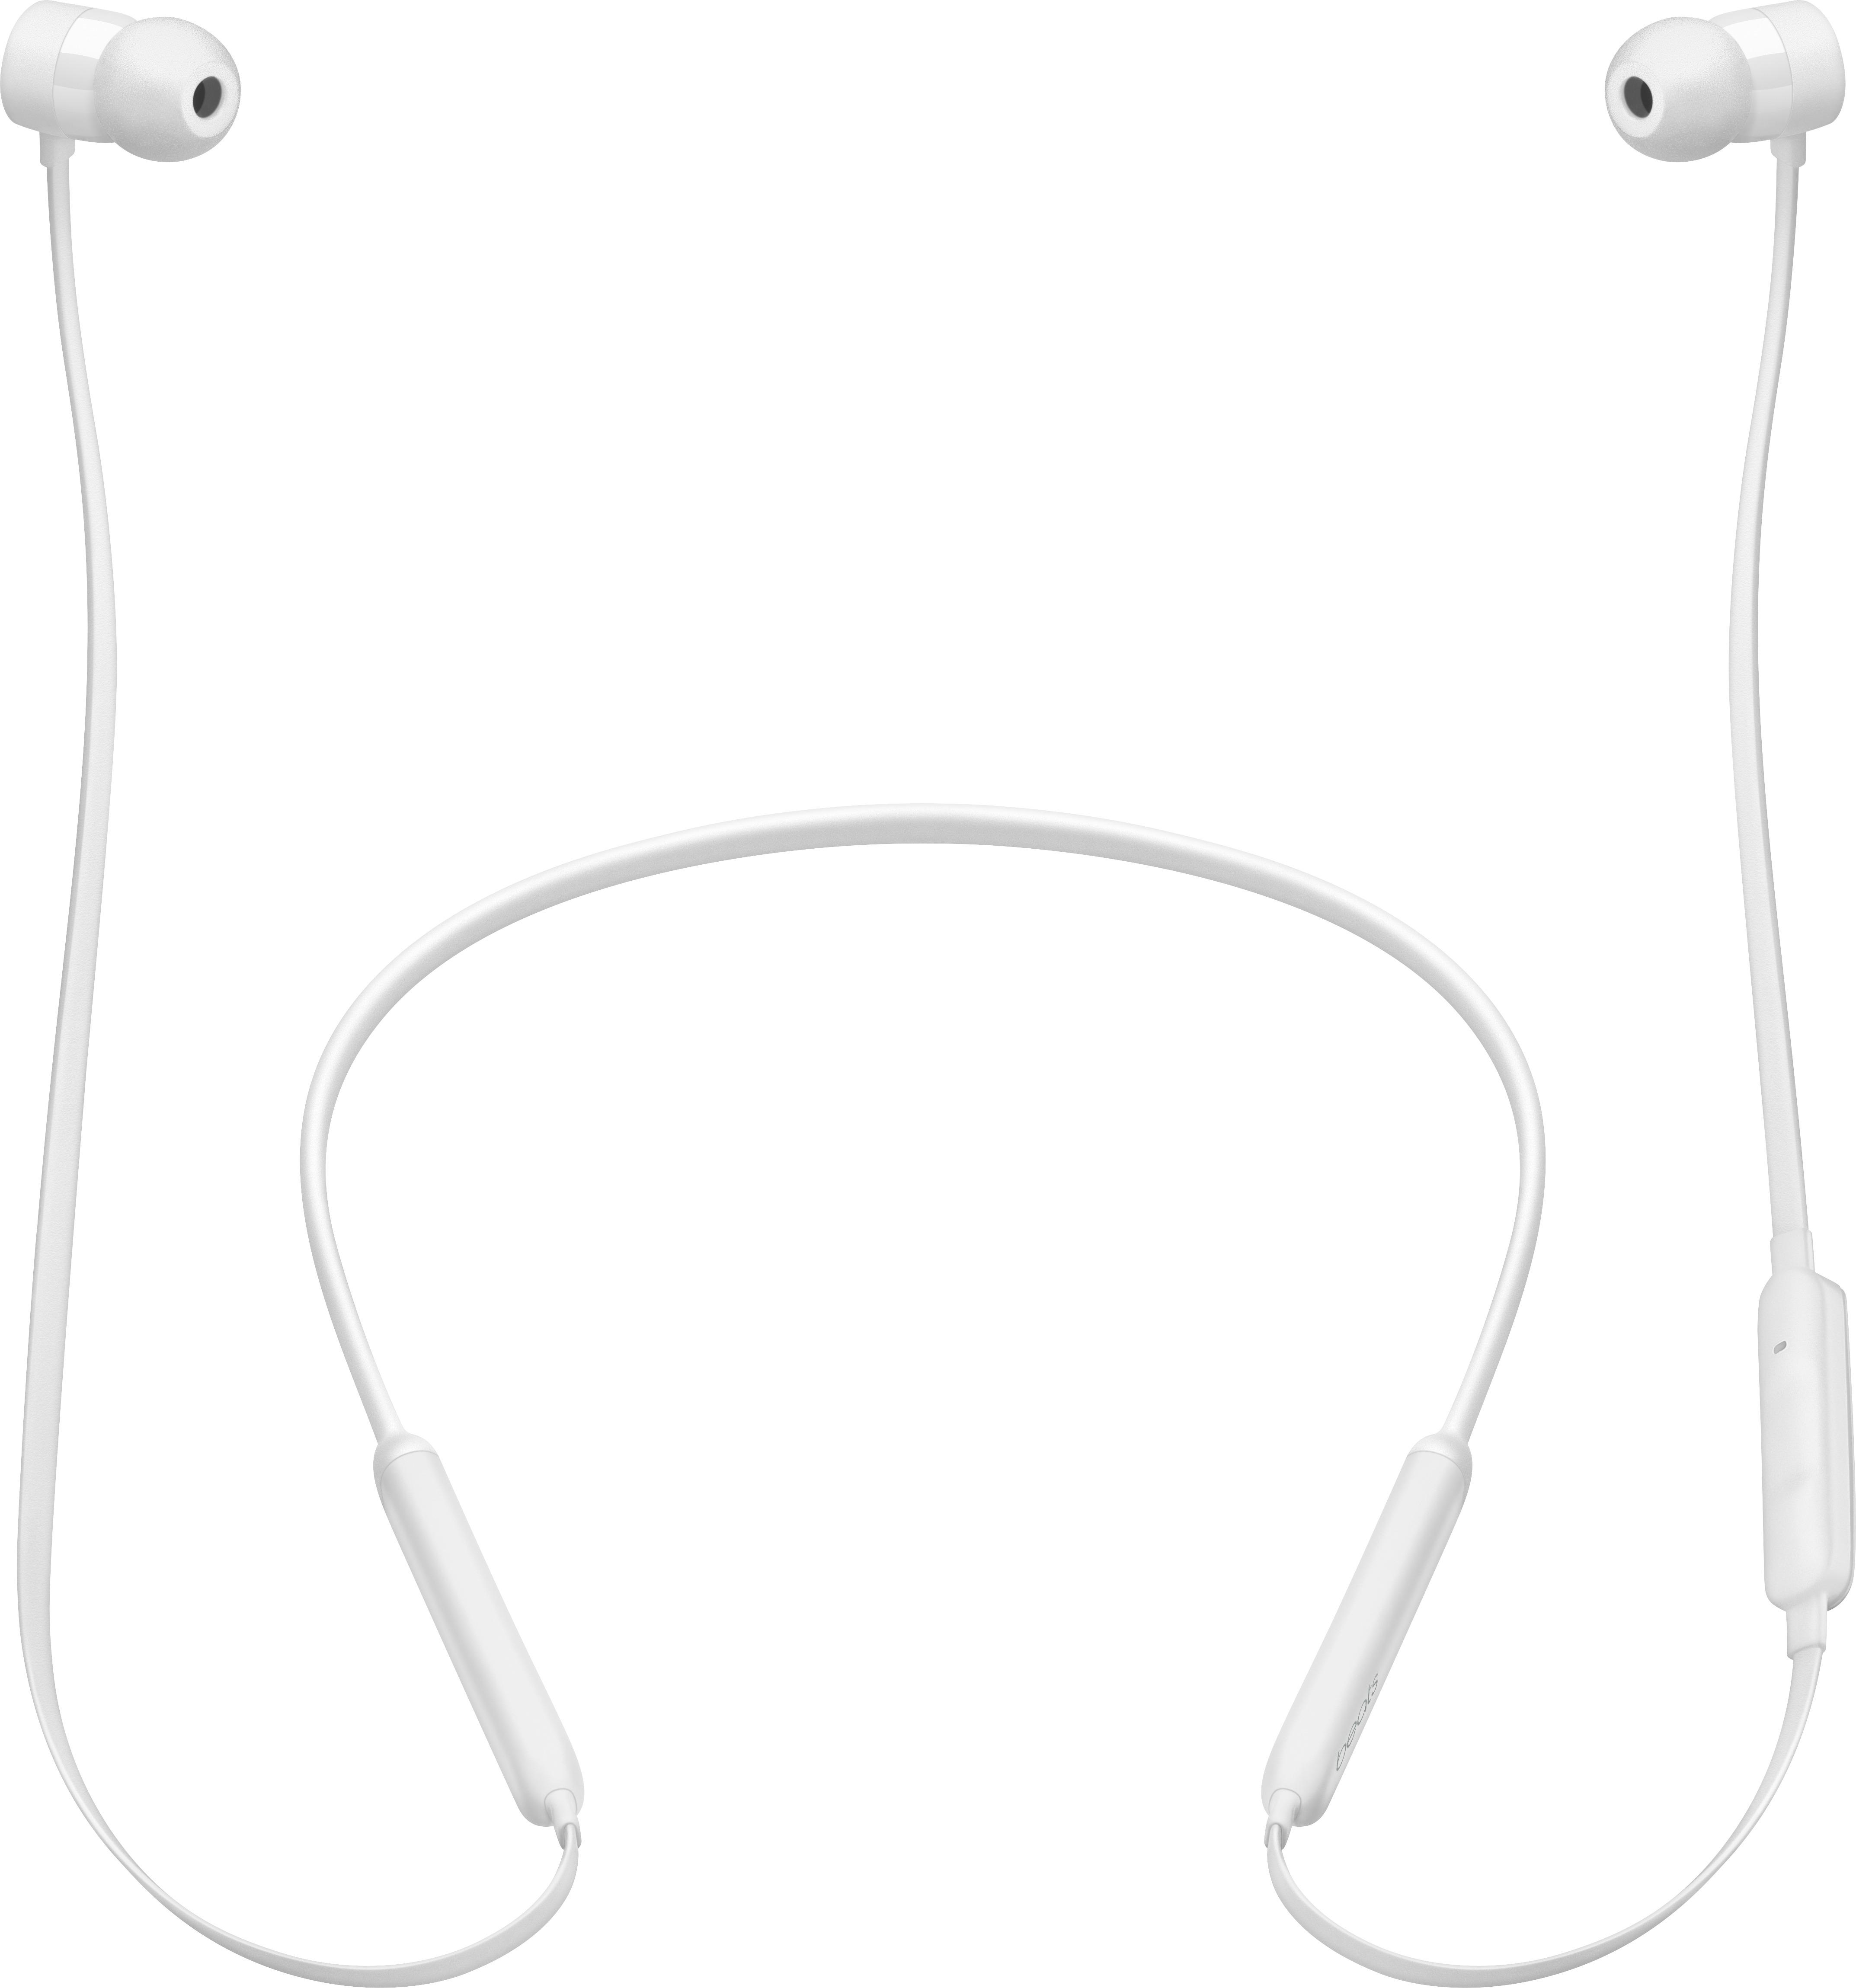 Angle View: Beats by Dr. Dre - Geek Squad Certified Refurbished BeatsX Earphones - White